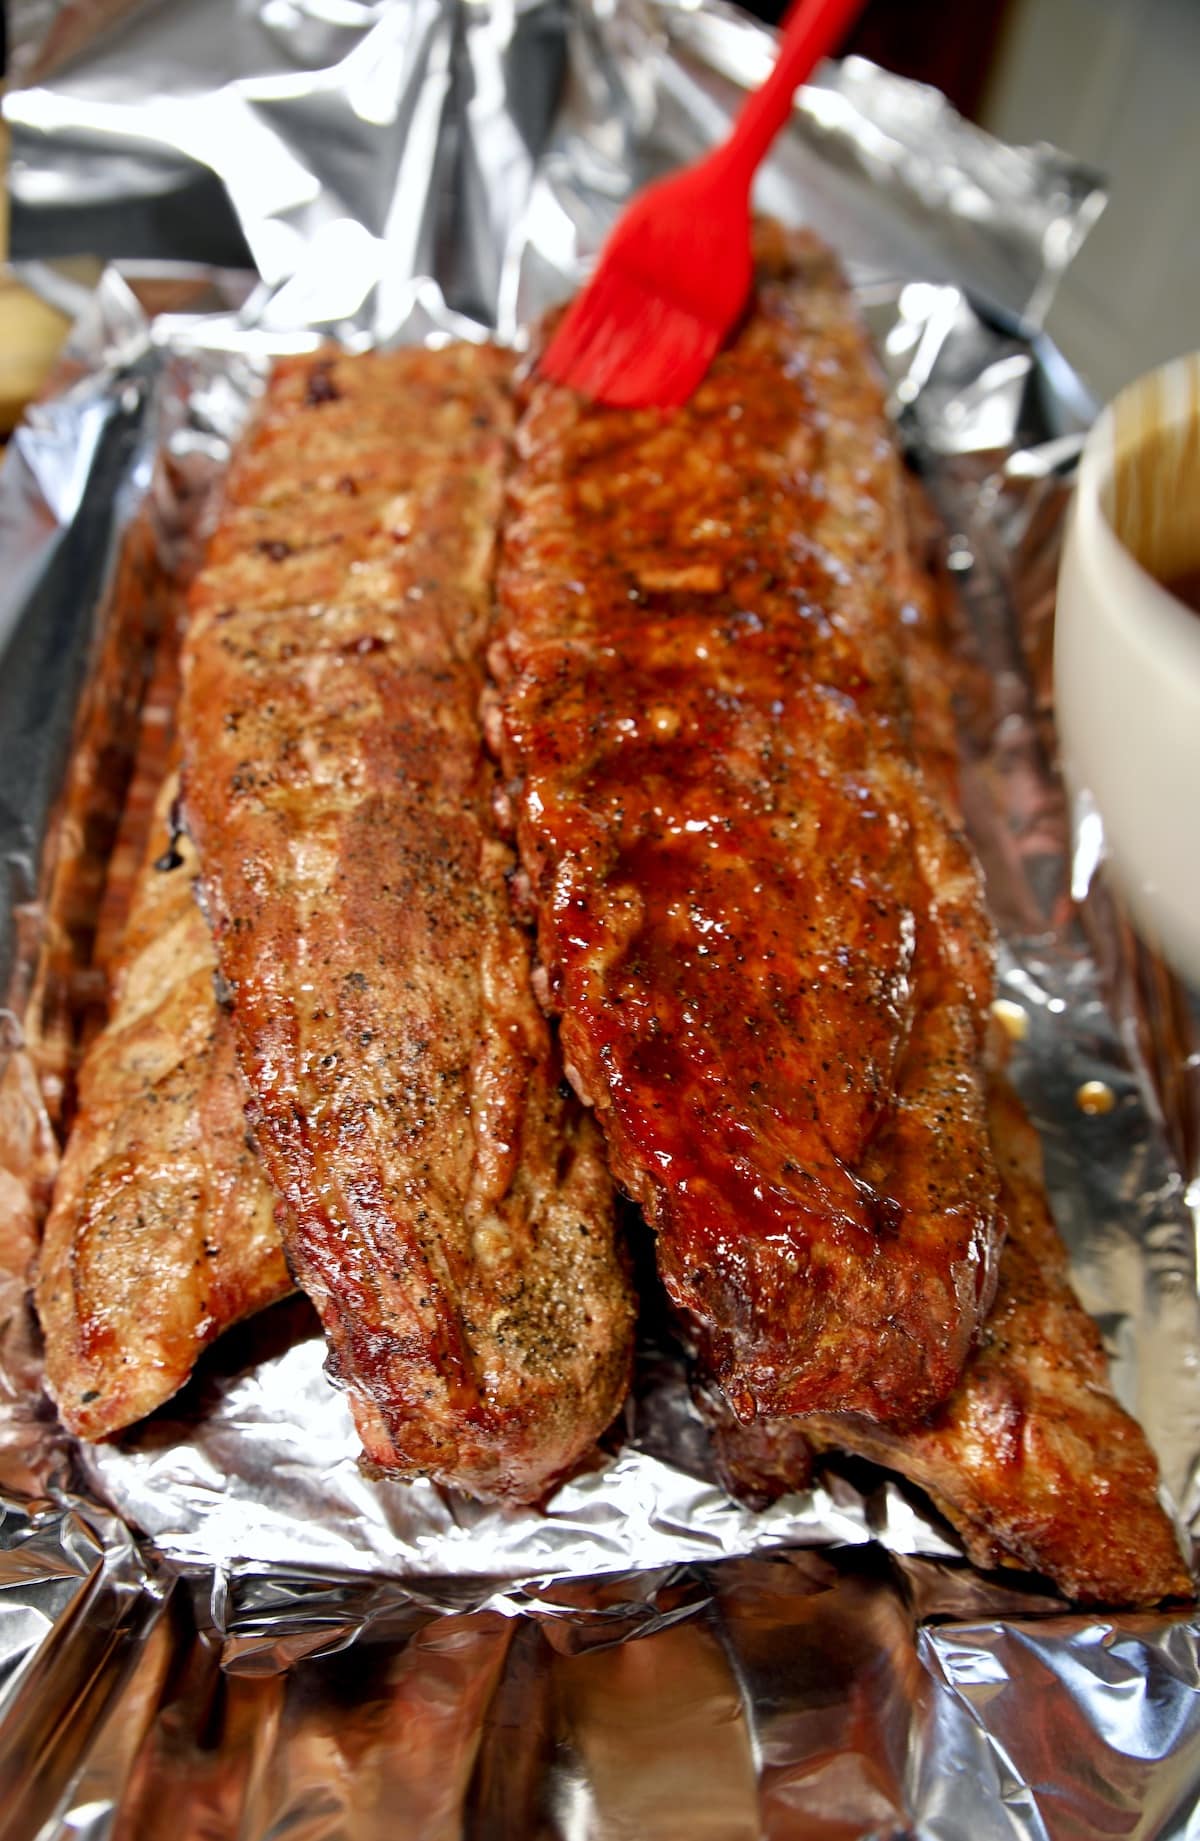 Smoked baby back ribs on a foil lined pan, brushing with sauce.